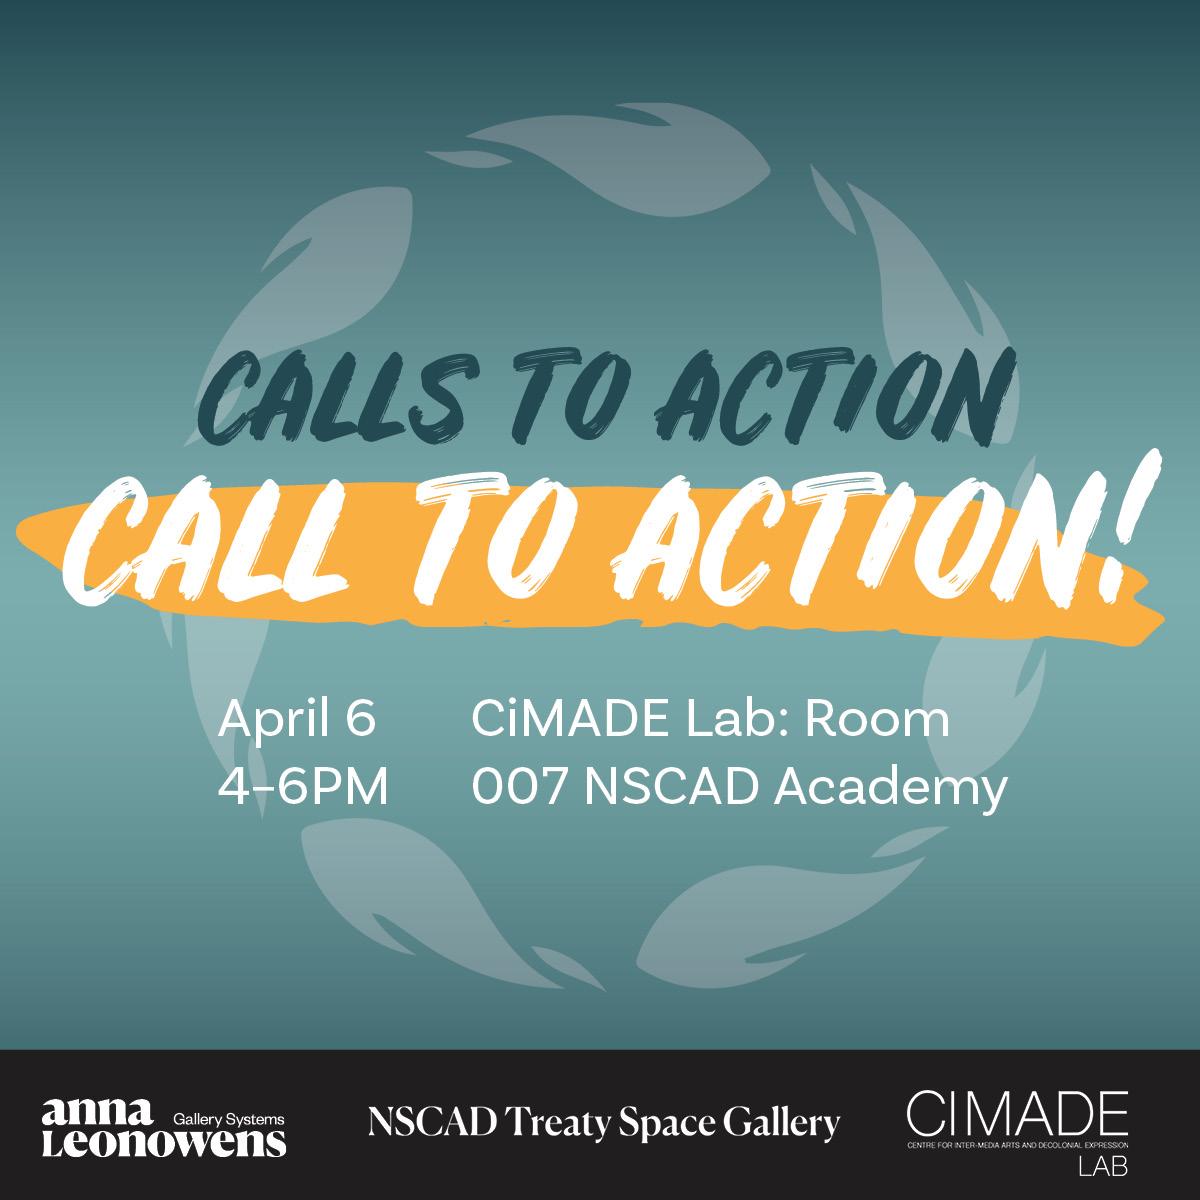 Dark and light teal gradient background, with text saying "Calls to Action Call to Action! April 6 4–6PM, CiMADE Lab: Room 007 NSCAD Academy." An orange banner is beneath the words "Call to Action!" Banner in black at the bottom of the image with white logos of Anna Leonowens Gallery Systems, NSCAD Treaty Space Gallery, and CiMADE Lab.